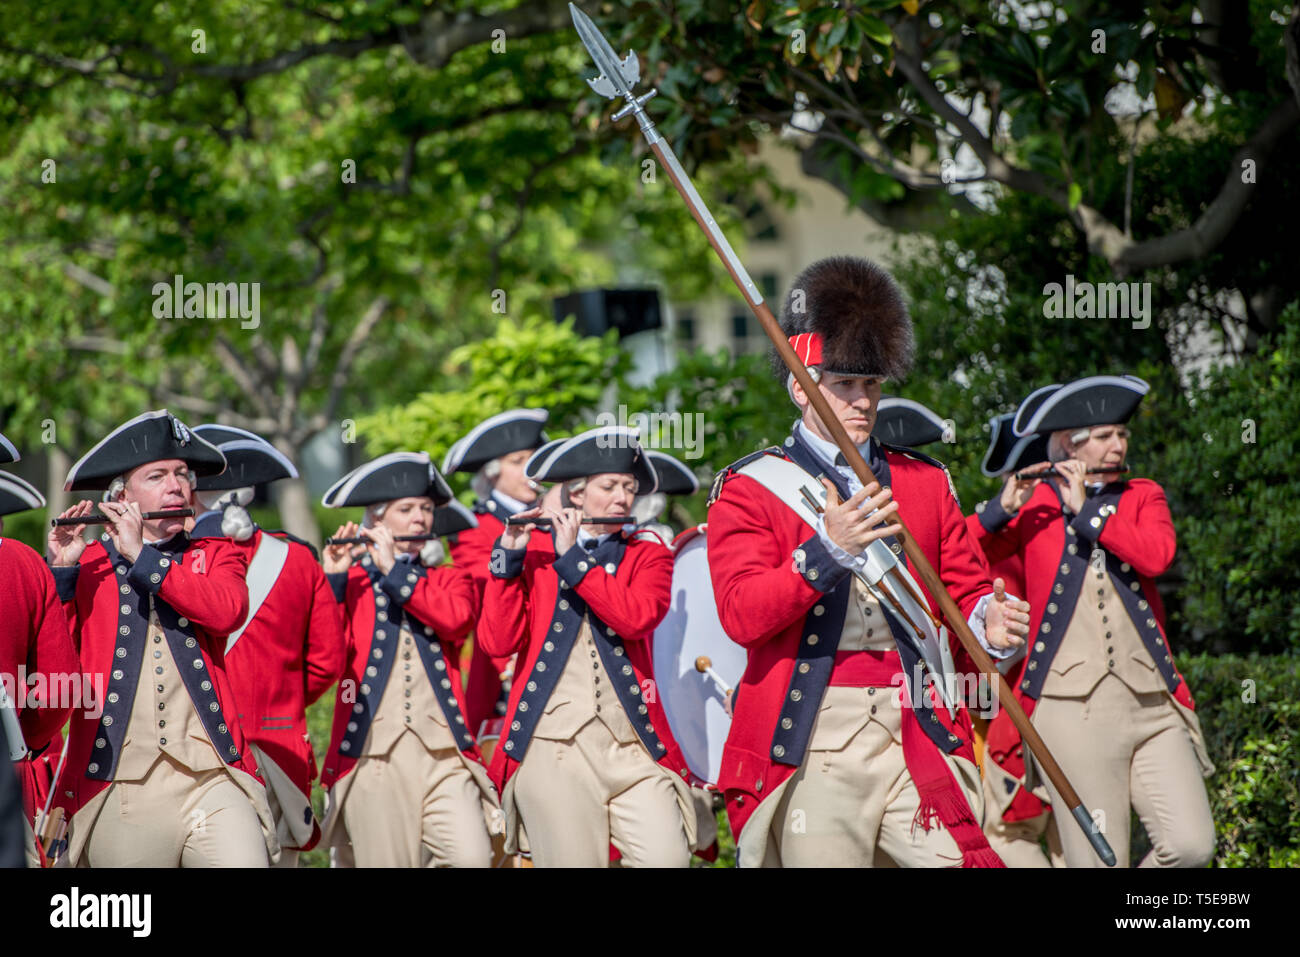 Soldiers with the 3d U.S. Infantry Regiment (The Old Guard) Fife and Drum Corps perform during the 141st White House Easter Egg Roll, April 22, 2019, Washington, D.C. Since 1878, Presidents and their families have celebrated Easter Monday by hosting an “egg roll” party, which is held on the South Lawn. The performance is one of the many community outreach activities the regiment conducts. (U.S. Army photos by Sgt. Nicholas T. Holmes) Stock Photo